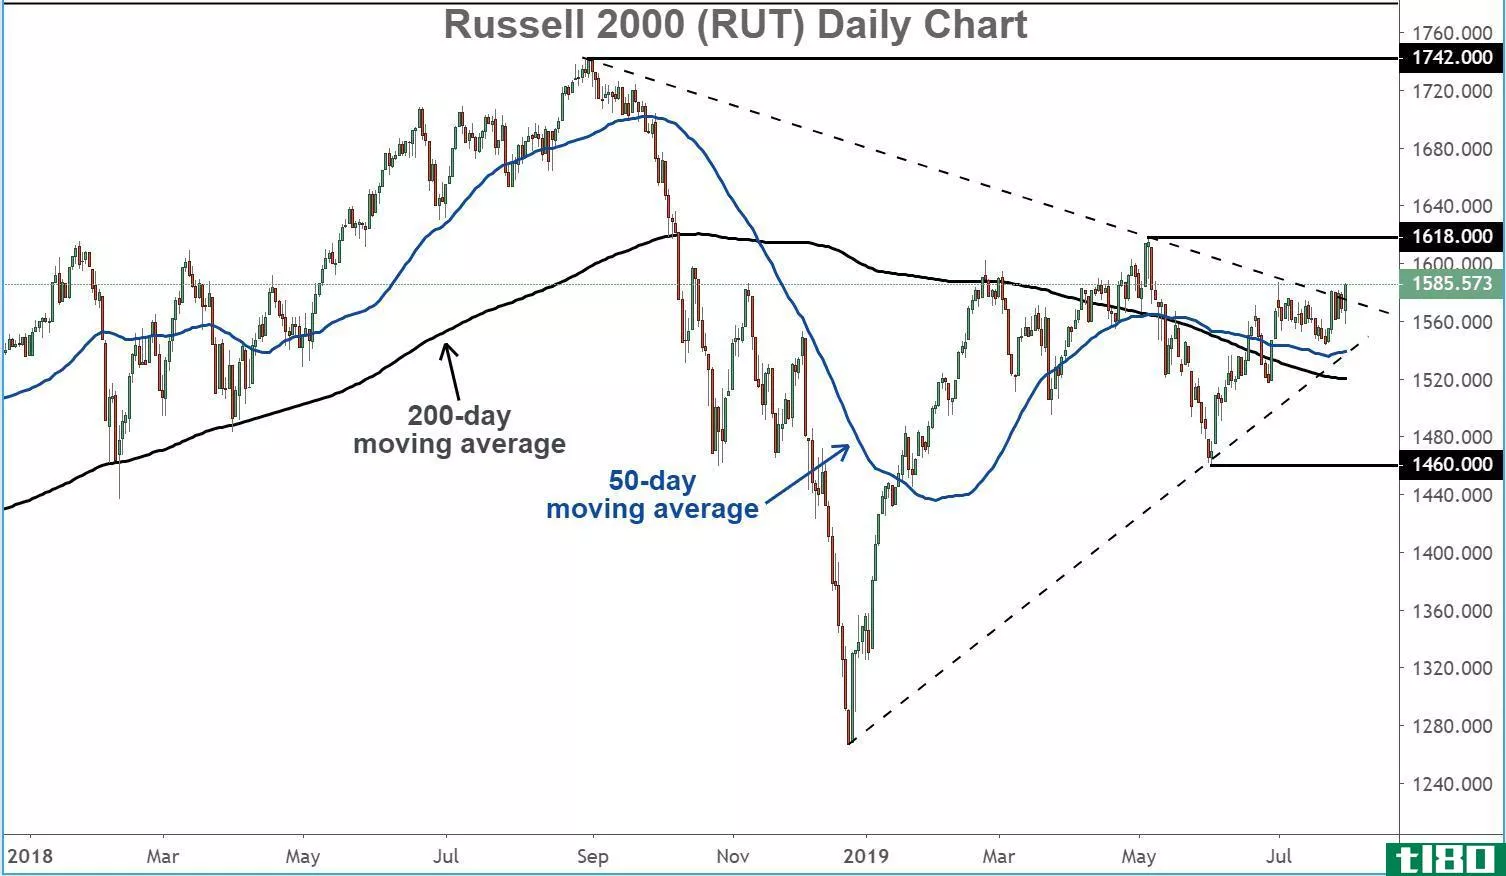 Daily chart showing the performance of the Russell 2000 Index